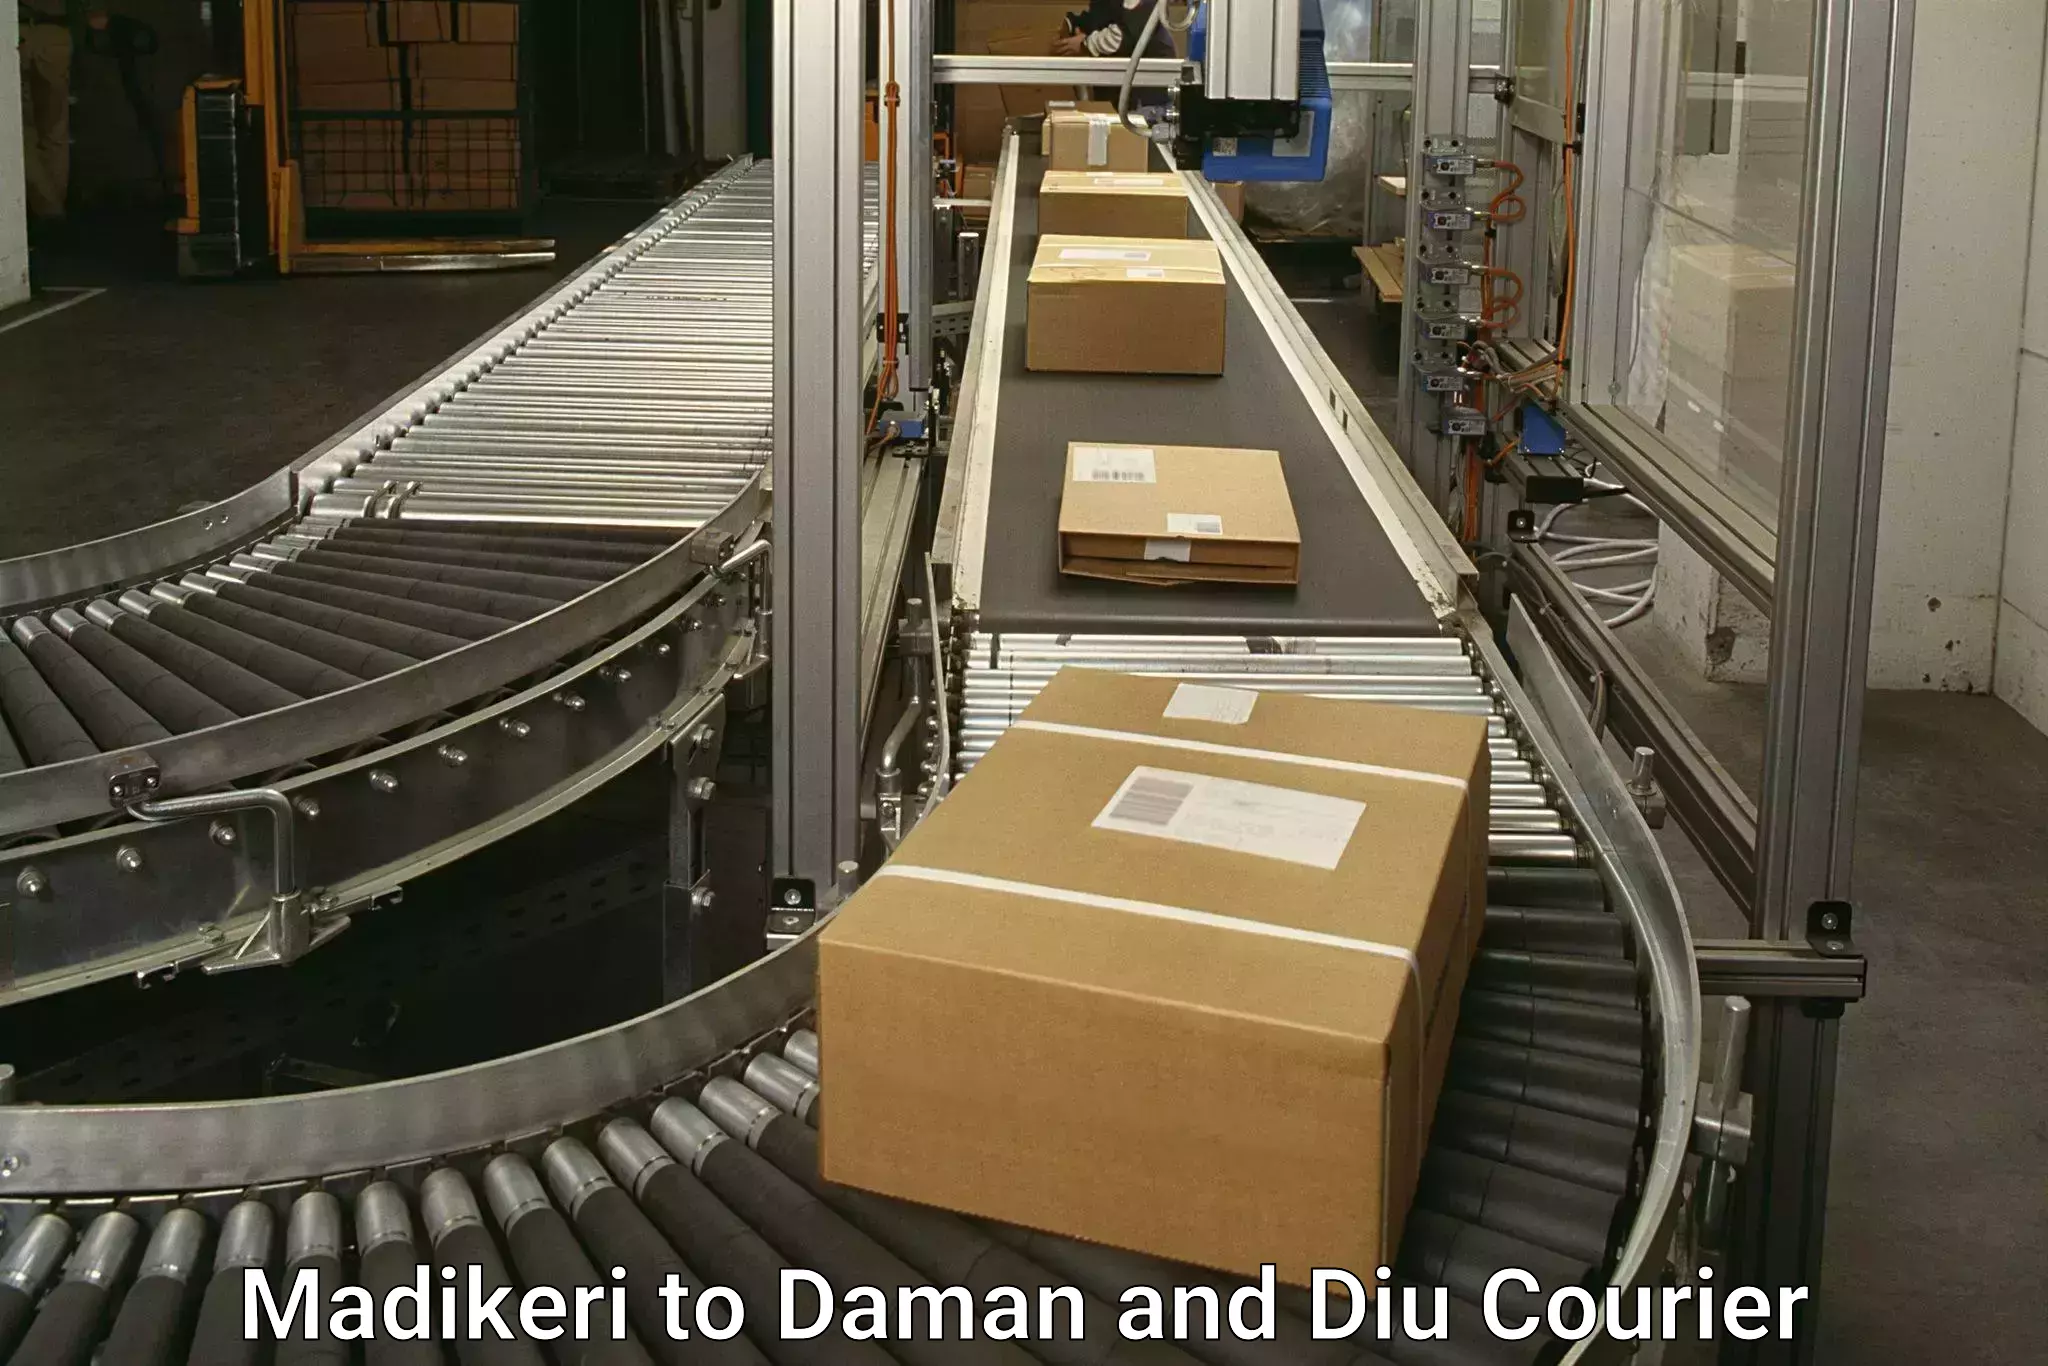 Subscription-based courier Madikeri to Diu